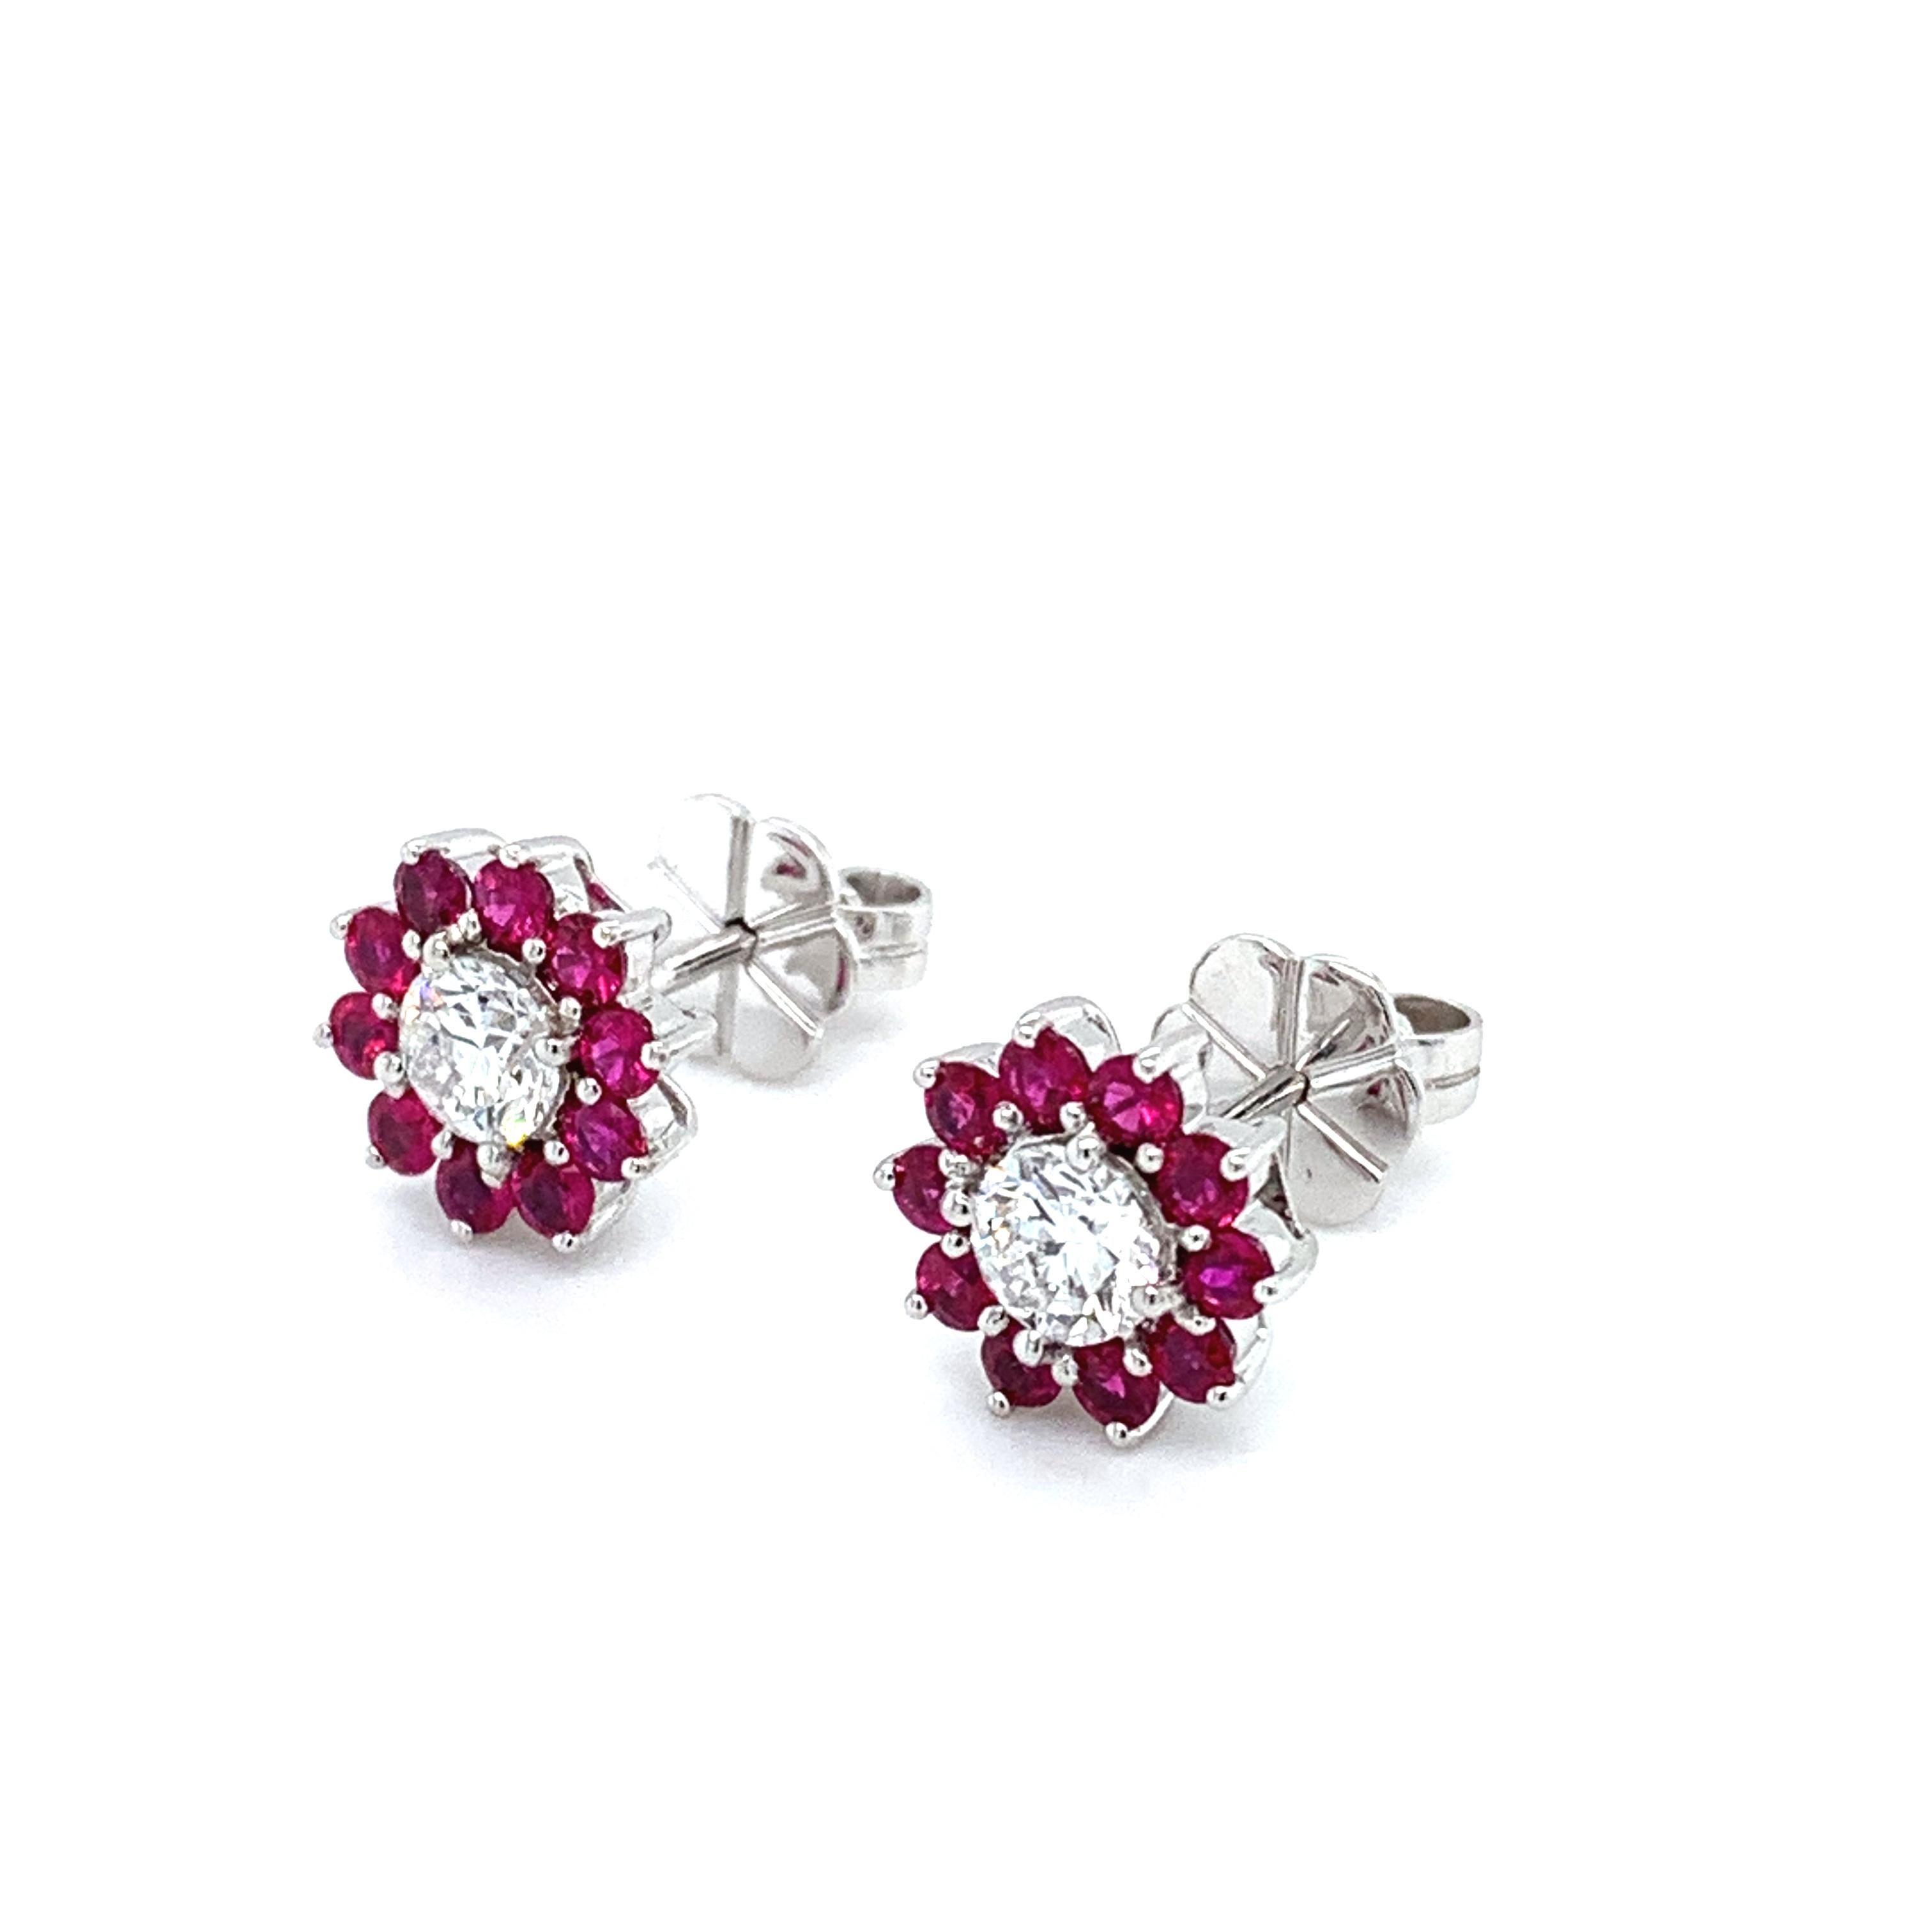 1.40ct Diamond ruby cluster art deco 18k white gold studs earrings.
Composed of round brilliant diamond with ruby cluster in 18k white gold
Diamond round brilliant cut total weight 0.50ct G colour, VS1 clarity
Ruby natural gemstone round cut total